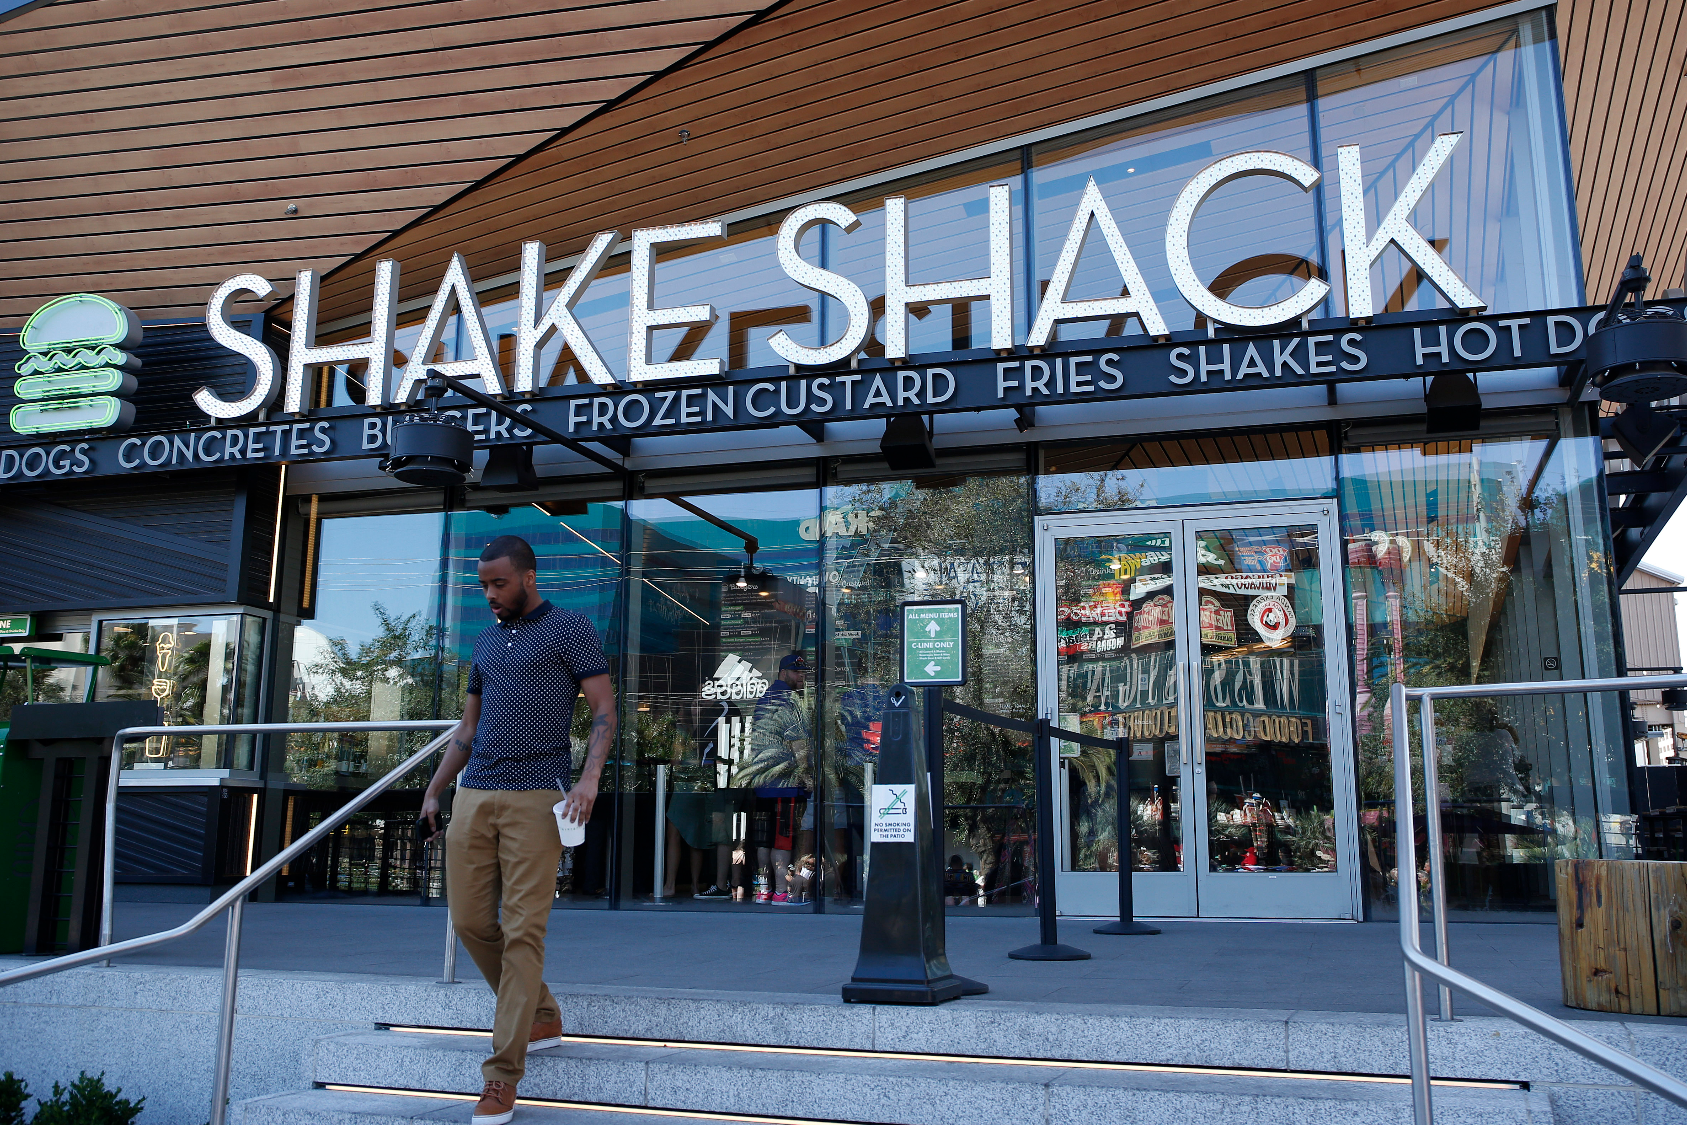 A man walks out of the Shake Shack in front of the New York-New York hotel and casino in Las Vegas. Shake Shack on Monday, Aug. 10, 2015 said that price hikes and the return of its crinkle-cut French fries helped lift sales 12.9 percent at established locations during the second quarter, and raised its outlook for the year. / <a href='John Locher'>Associated Press</a>